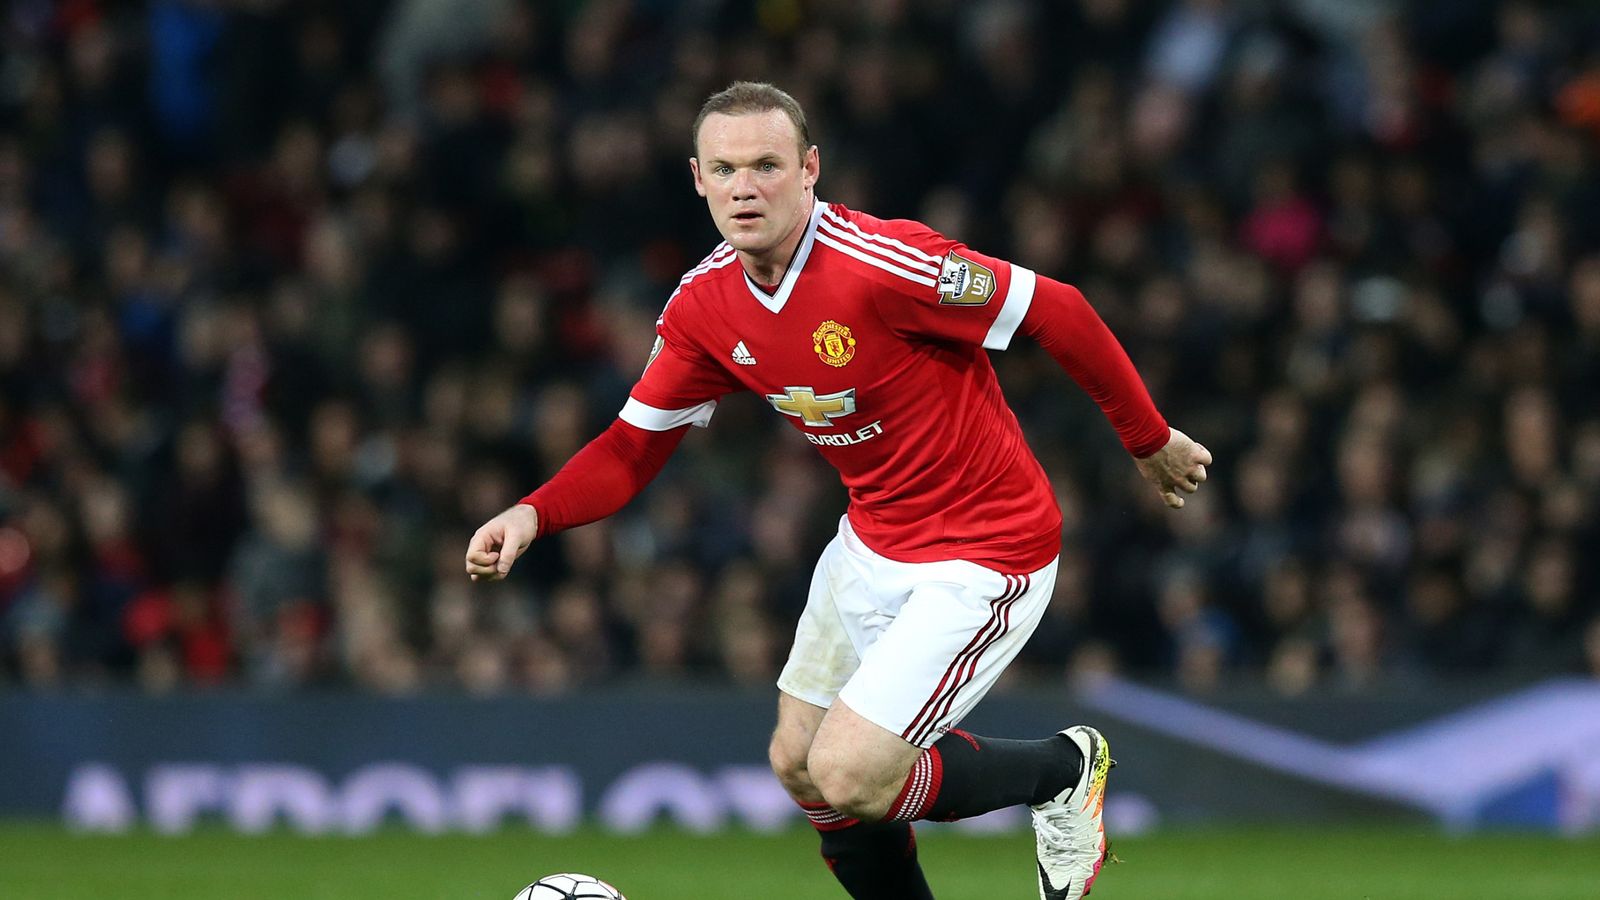 Wayne Rooney plays 61 minutes on return for Manchester United with U21